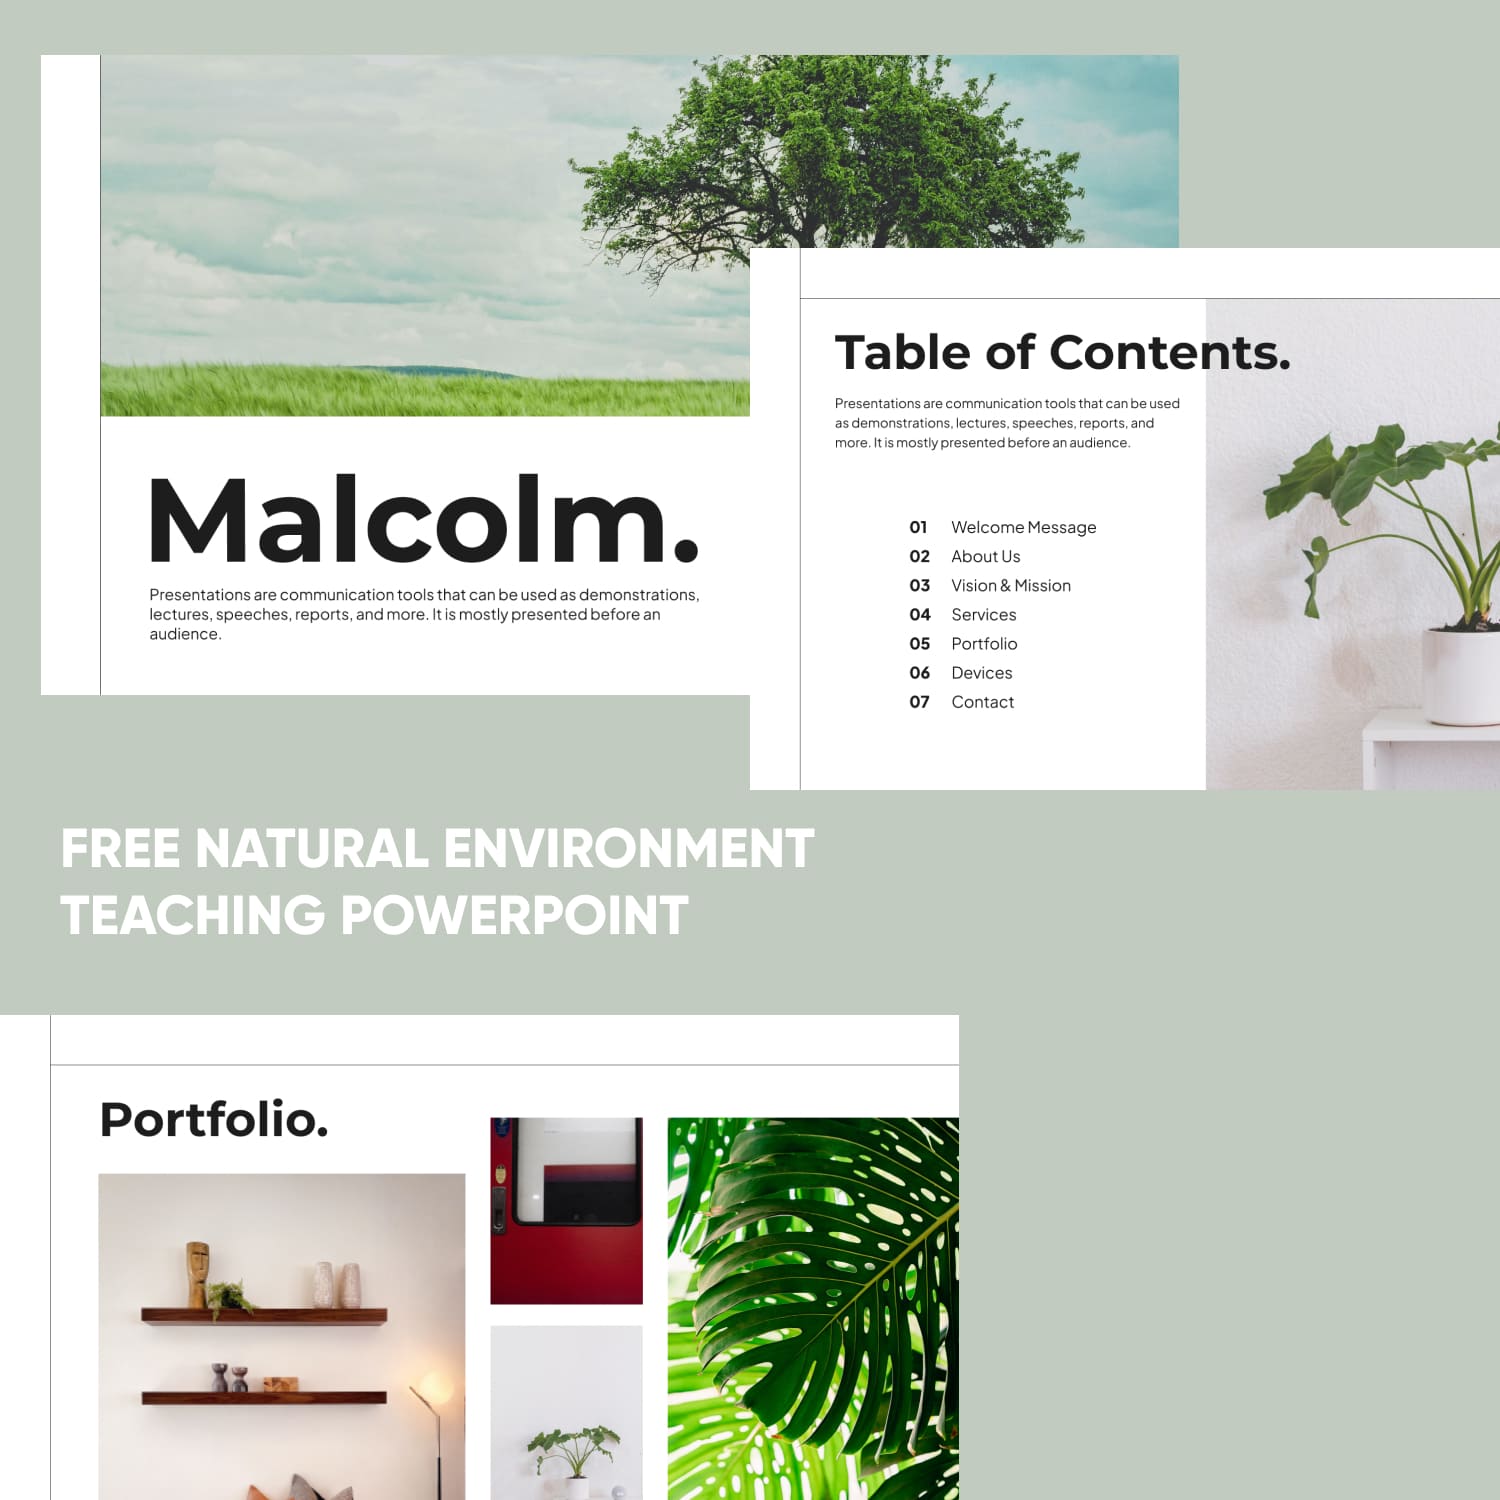 Free Natural Environment Teaching Powerpoint.